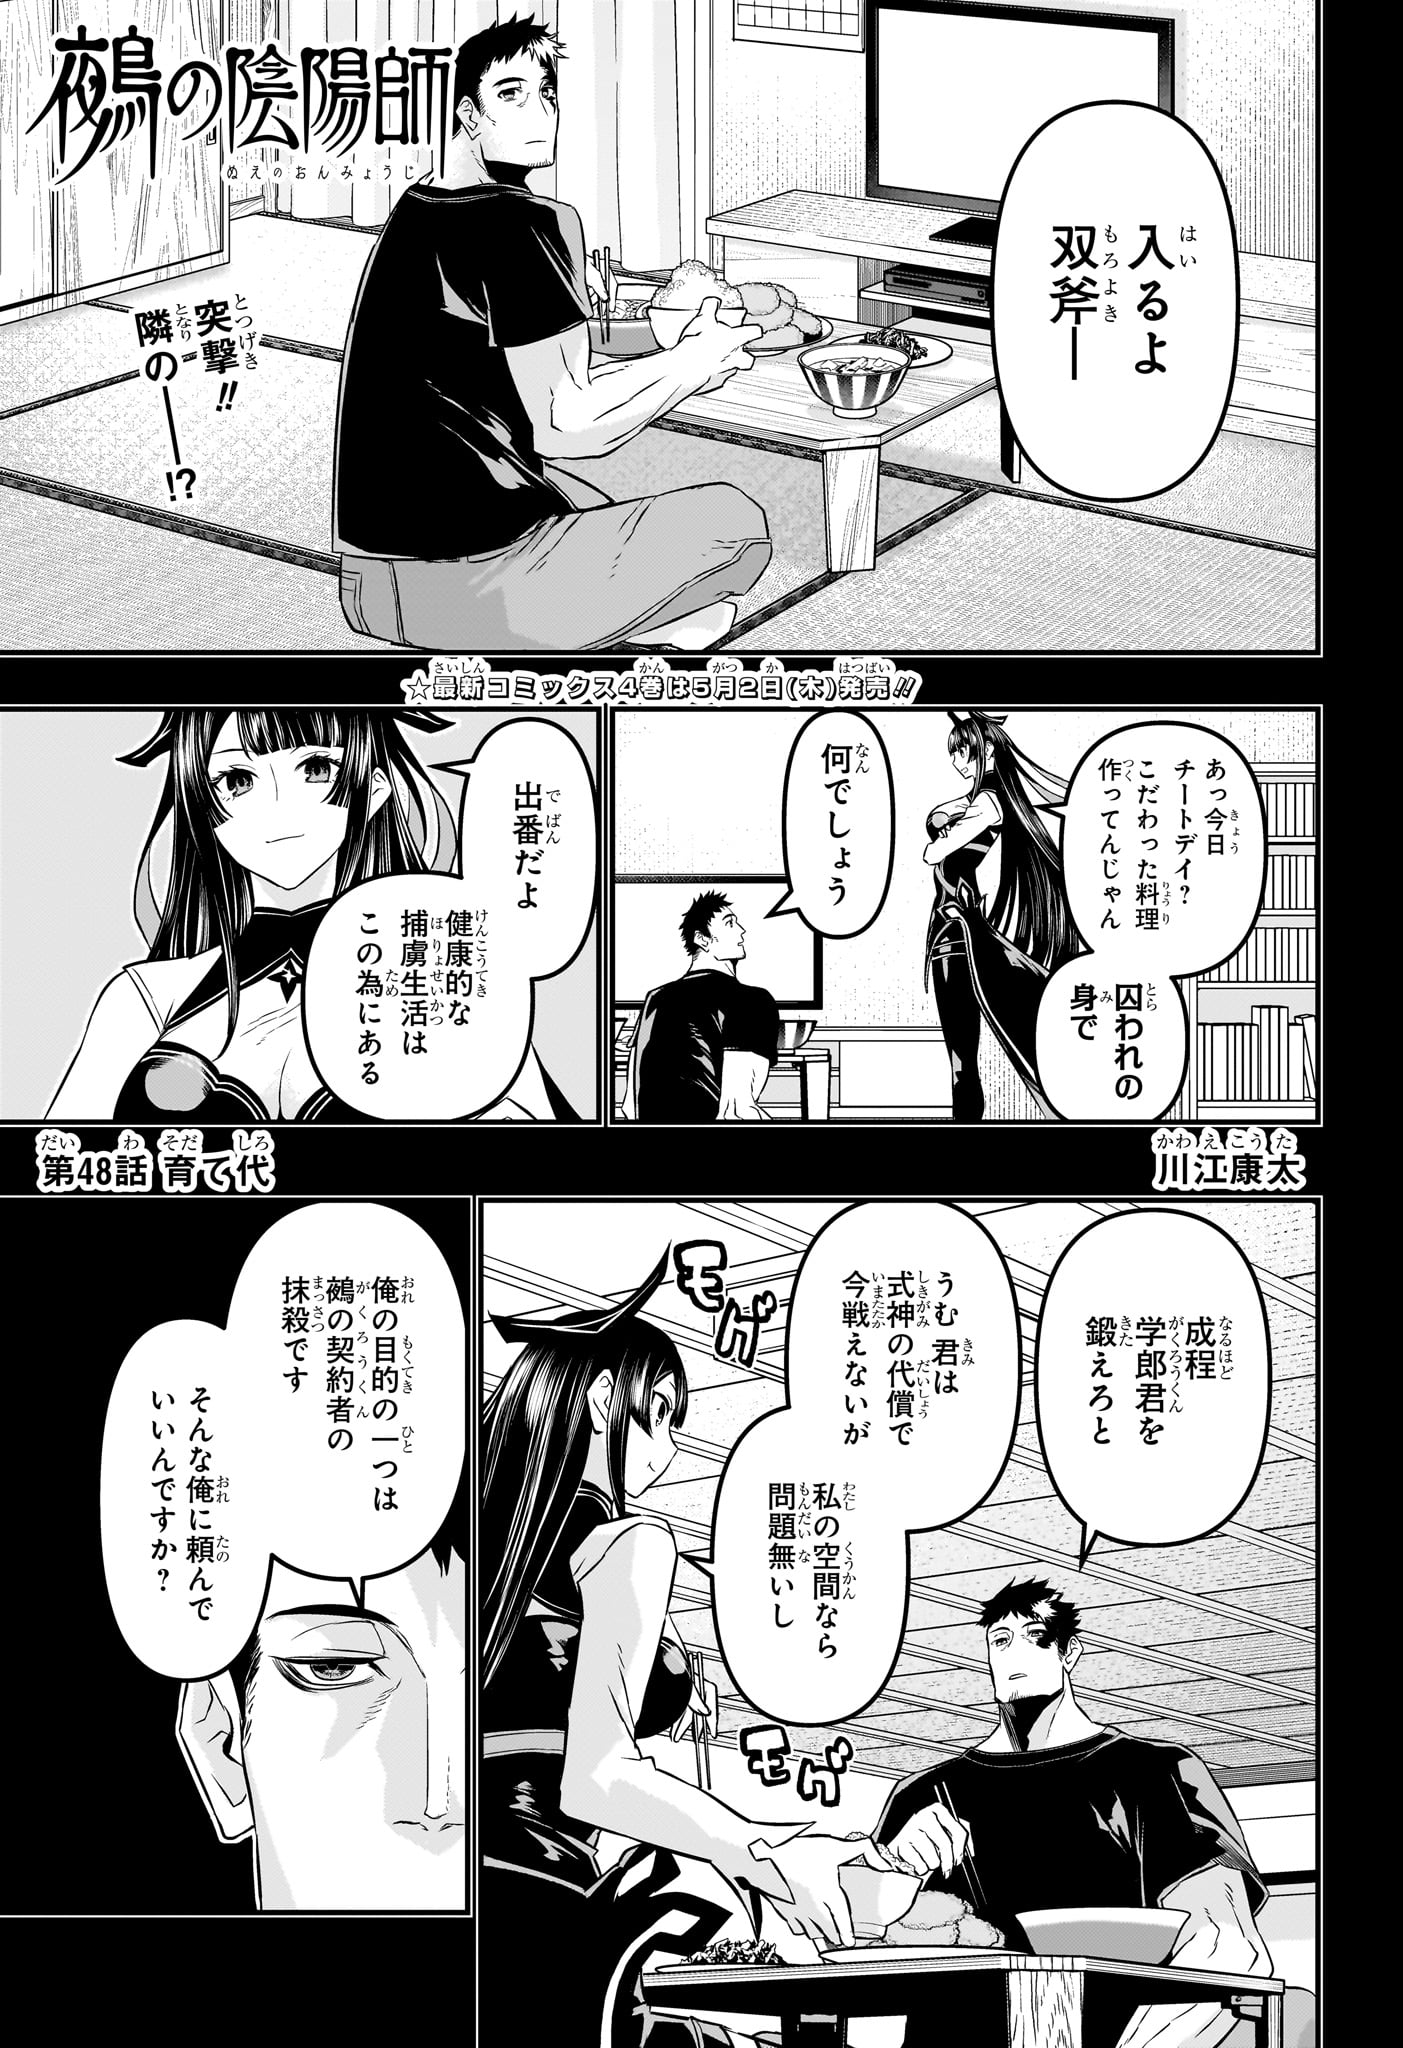 Nue no Onmyouji - Chapter 48 - Page 1